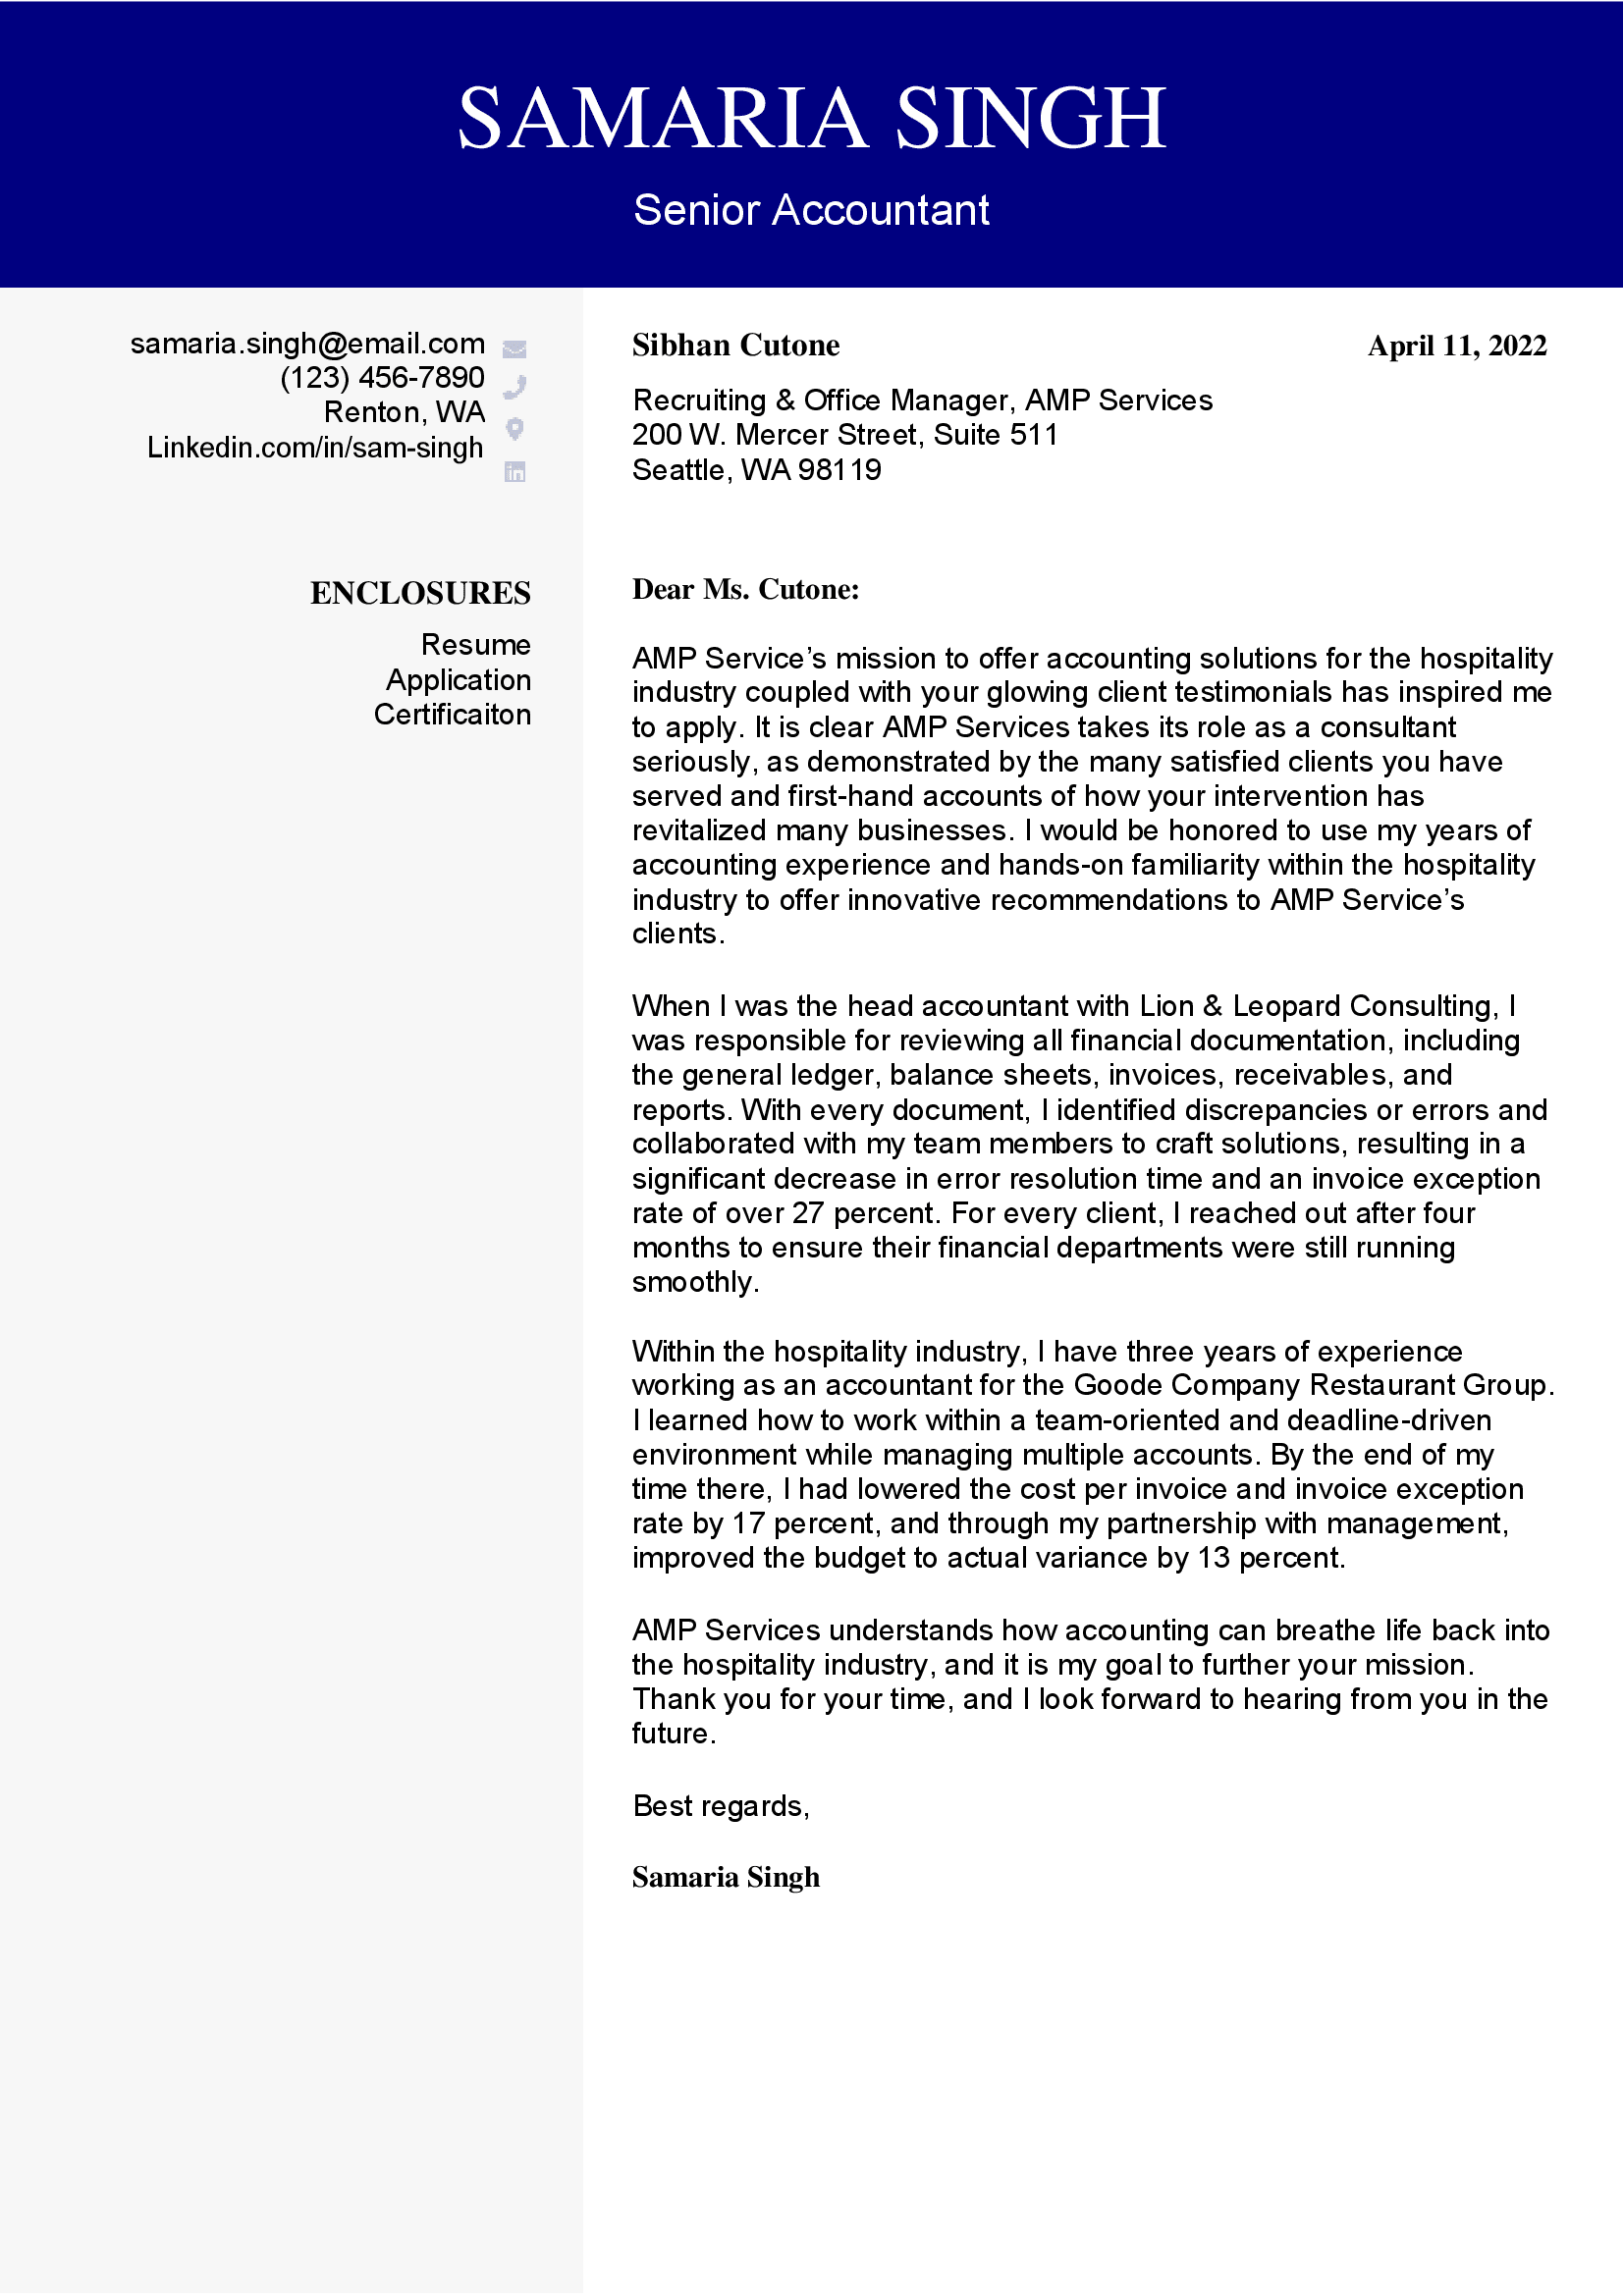 Senior accountant cover letter with blue contact header